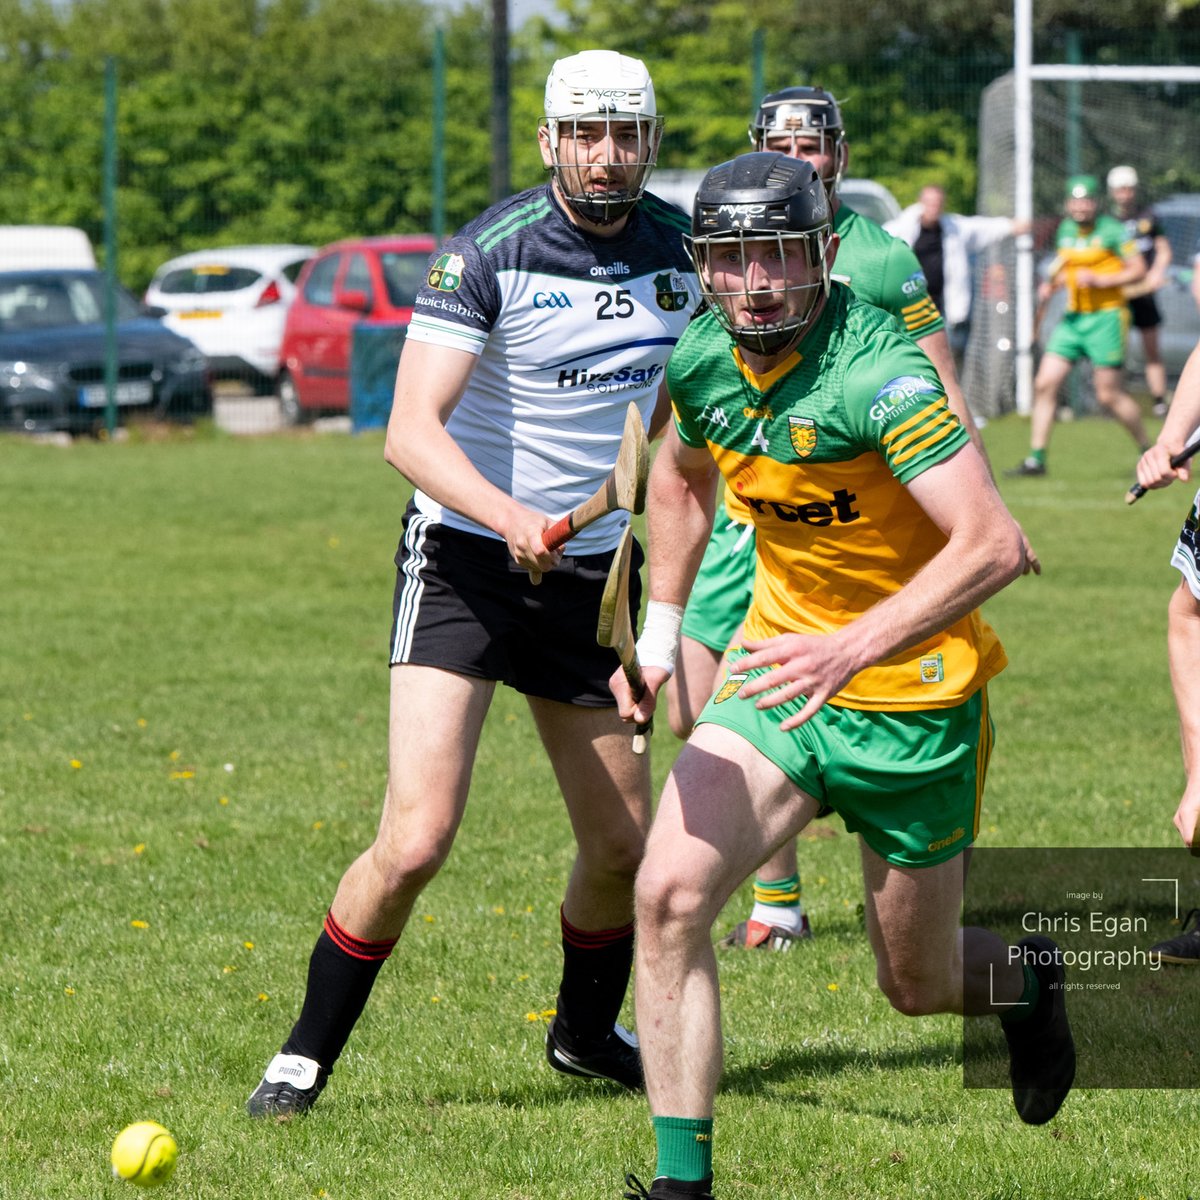 The focus for @officialdonegal switches to @TyroneGAALive following their successful visit to @warwickshireclg #NickyRackardCup #hurling #thetoughest #GAA